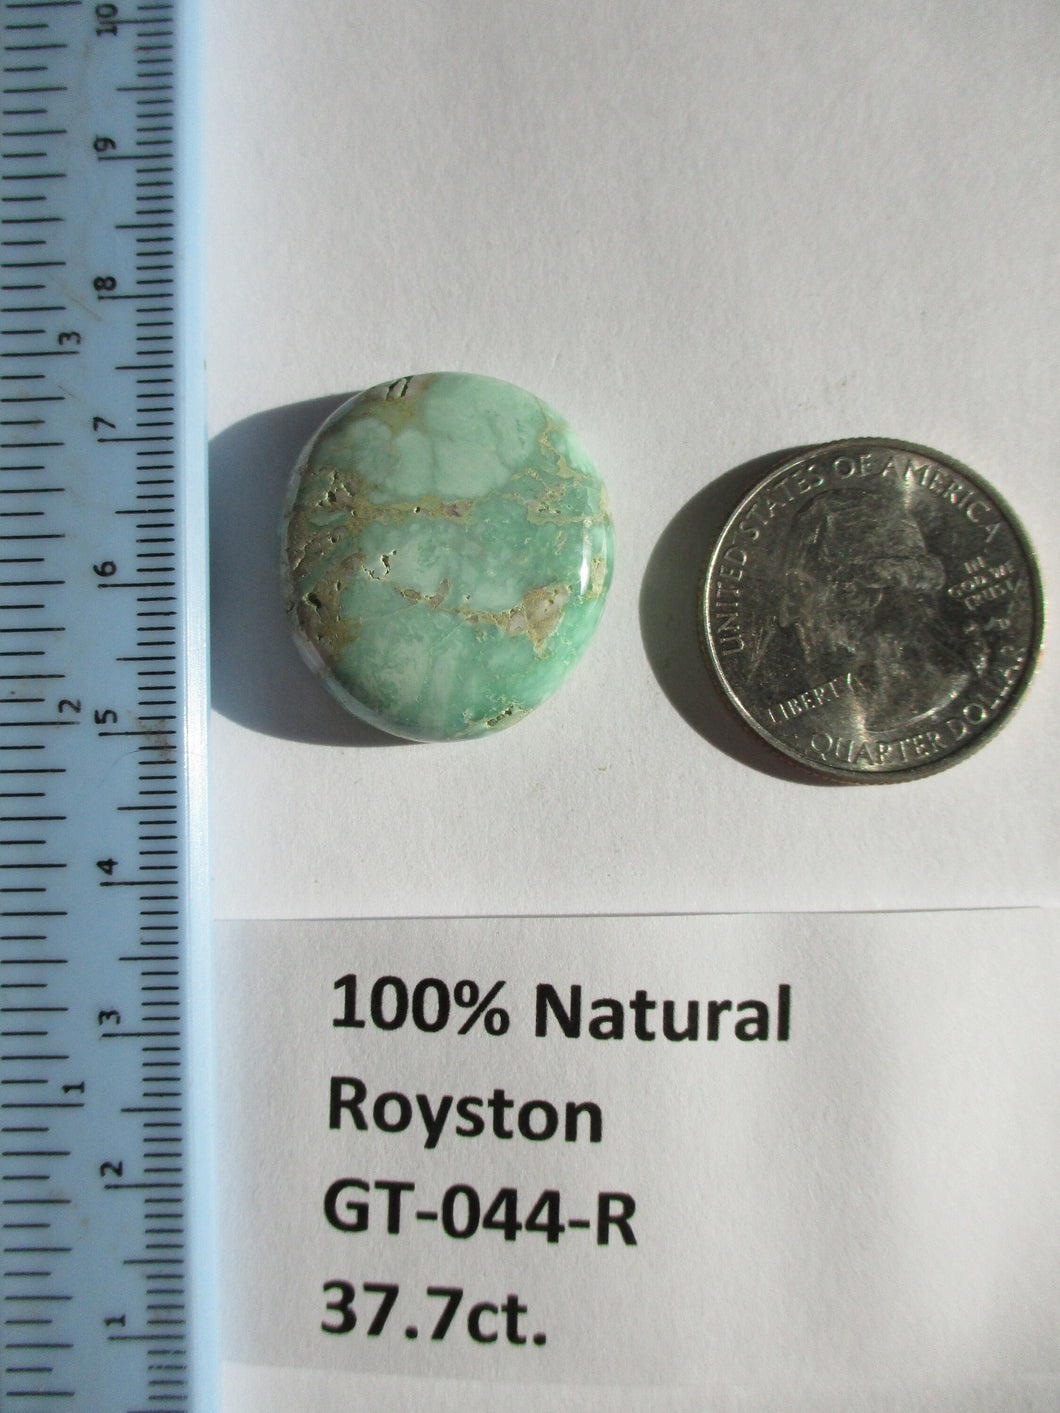 37.7 ct (26x23.5x7 mm) 100% Natural Royston Turquoise Cabochon Gemstone, GT 044